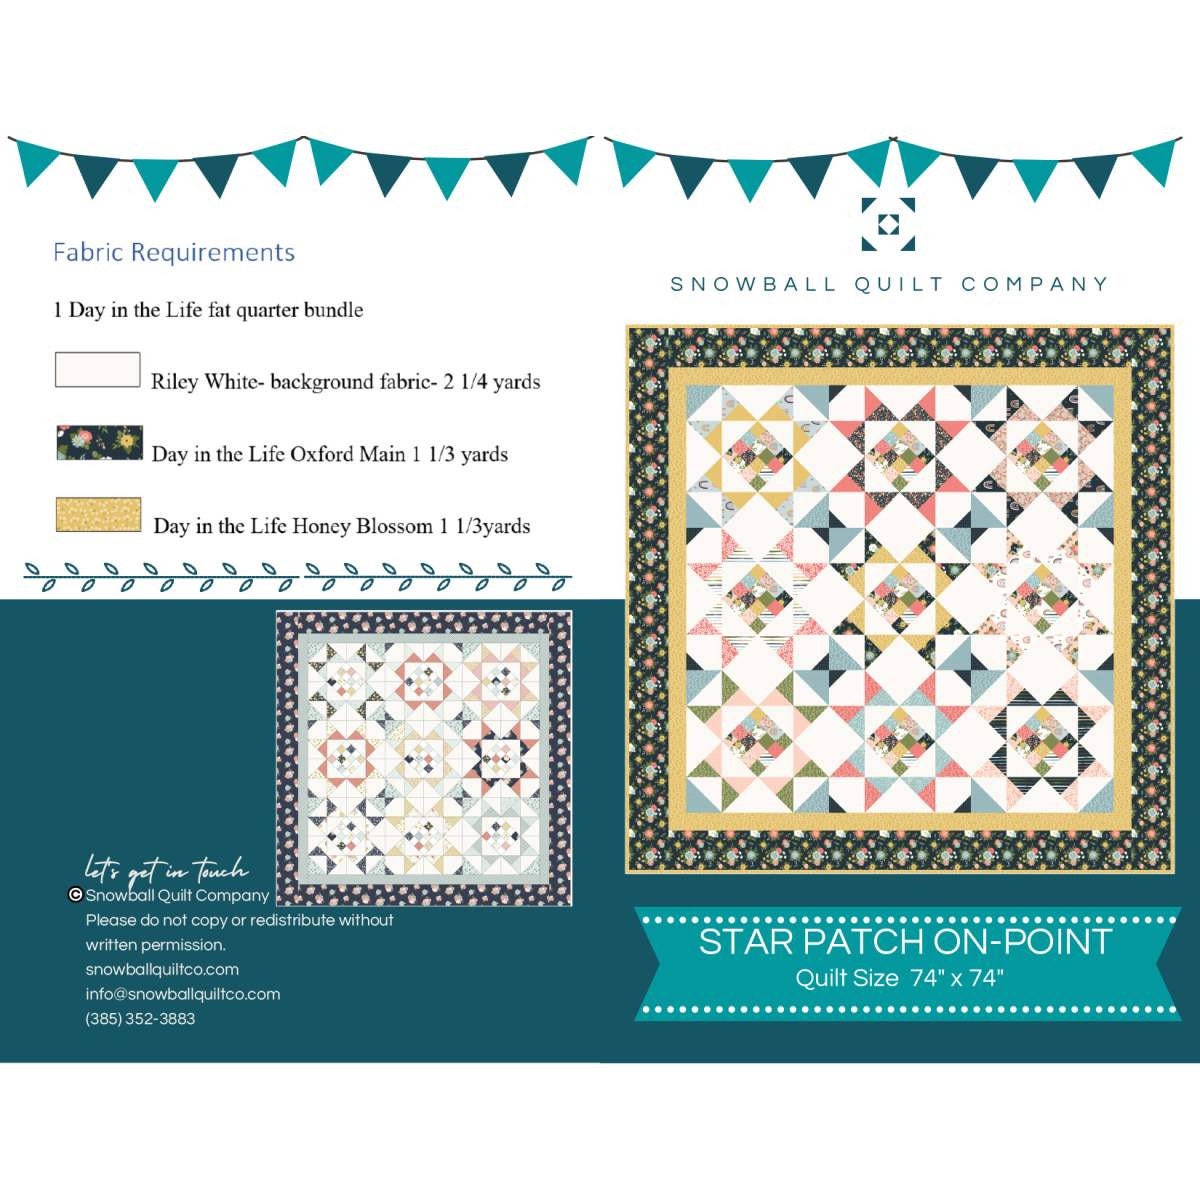 Star Patch On-Point Quilt Pattern by the Snowball Quilt Company